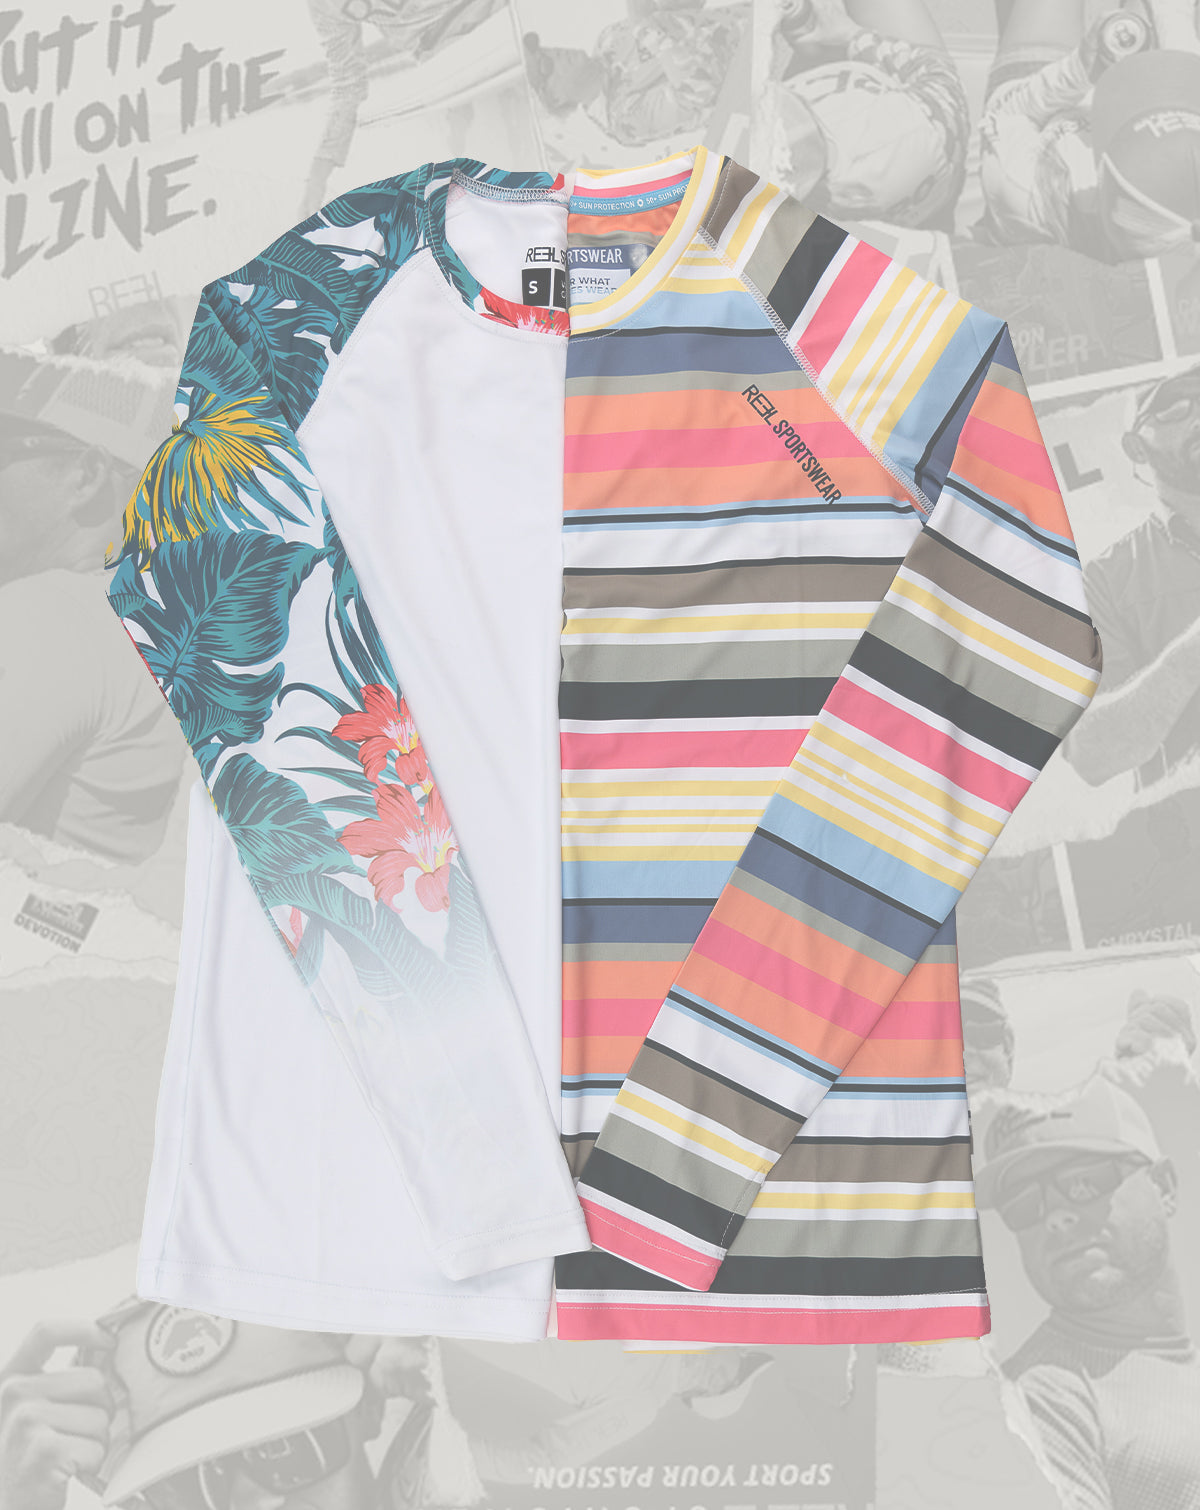 Still searching for that perfect fishing shirt? Huk clothing represents a  fresh take on the fishing world, offering styles that are young